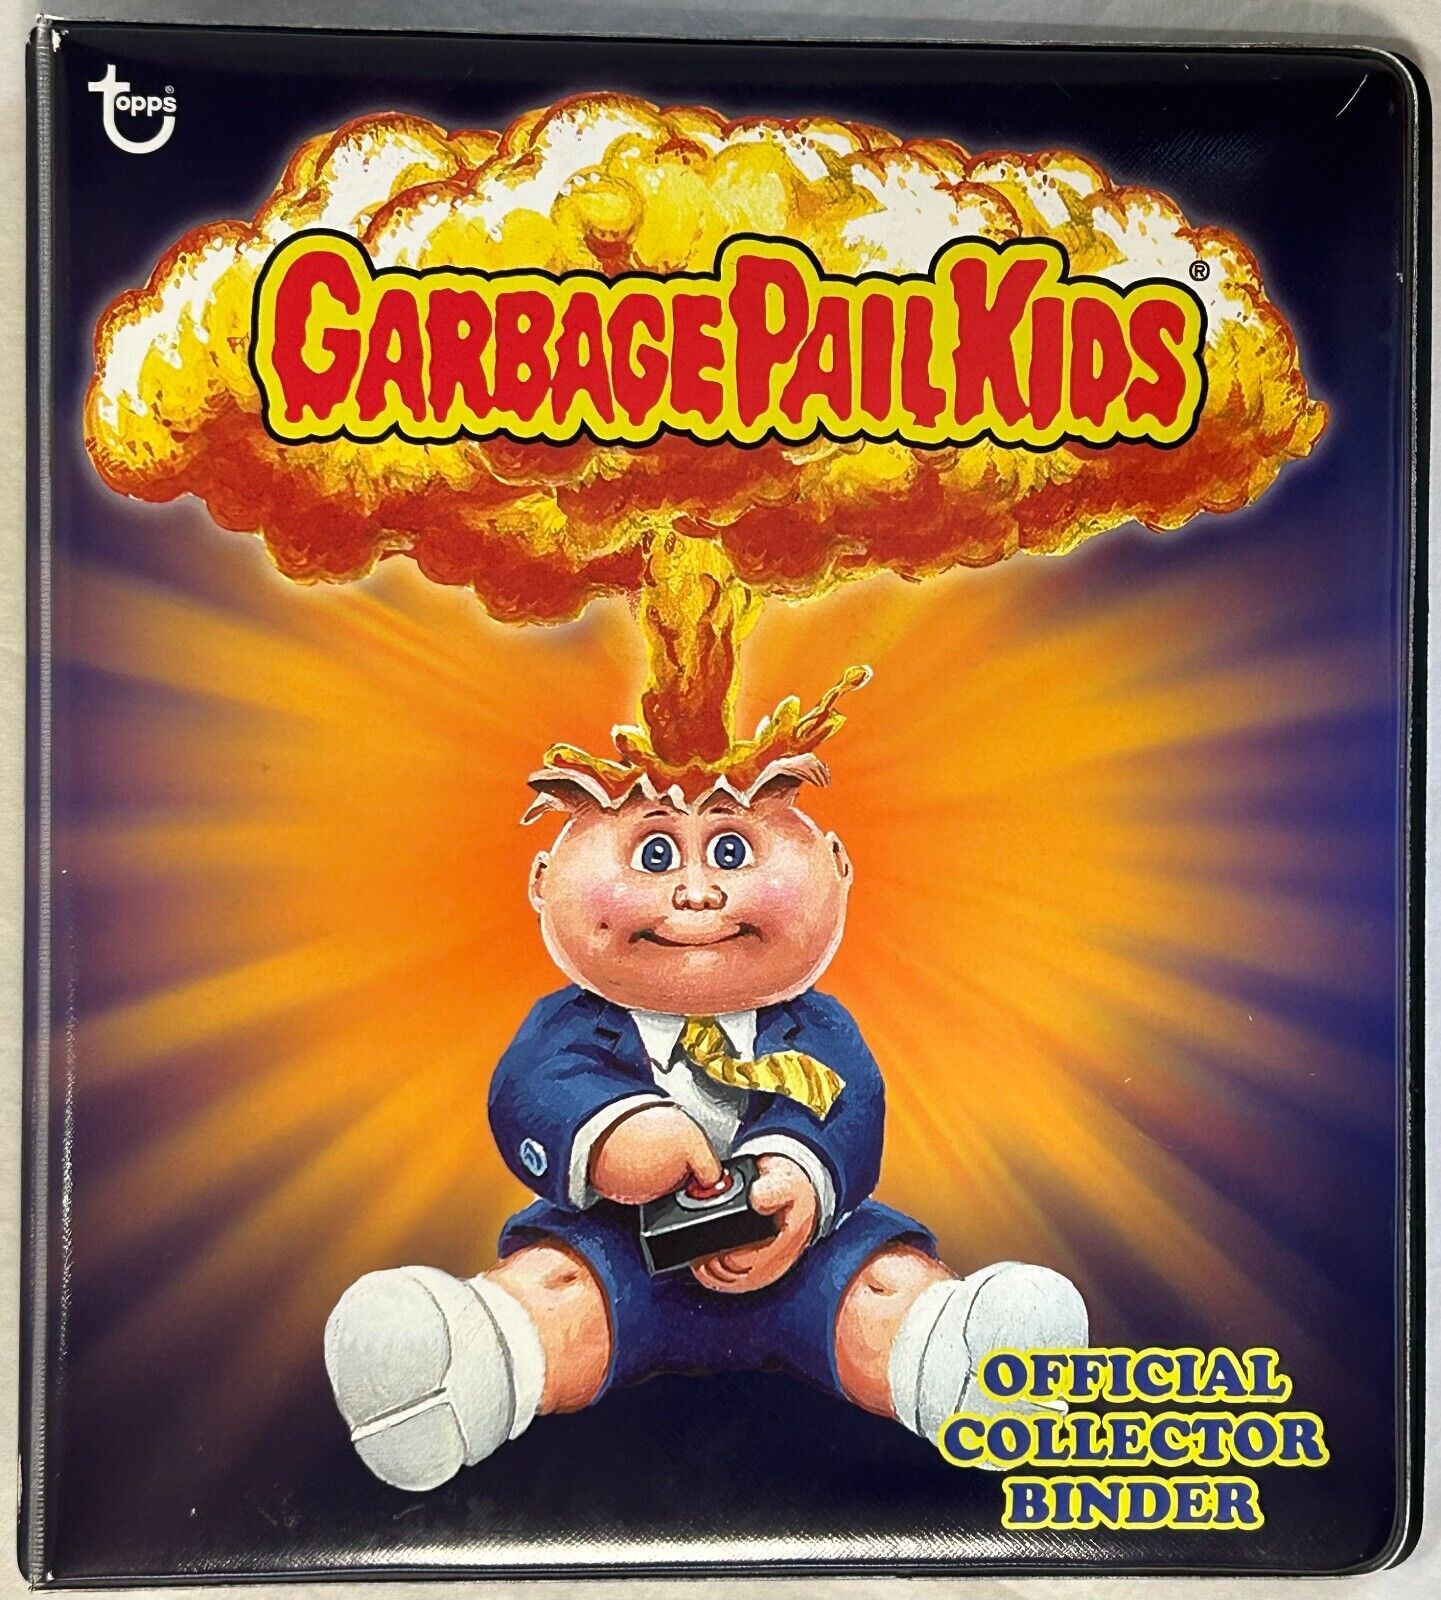 2013 Topps Garbage Pail Kids Official Collector ADAM BOMB Card Book BINDER GPK